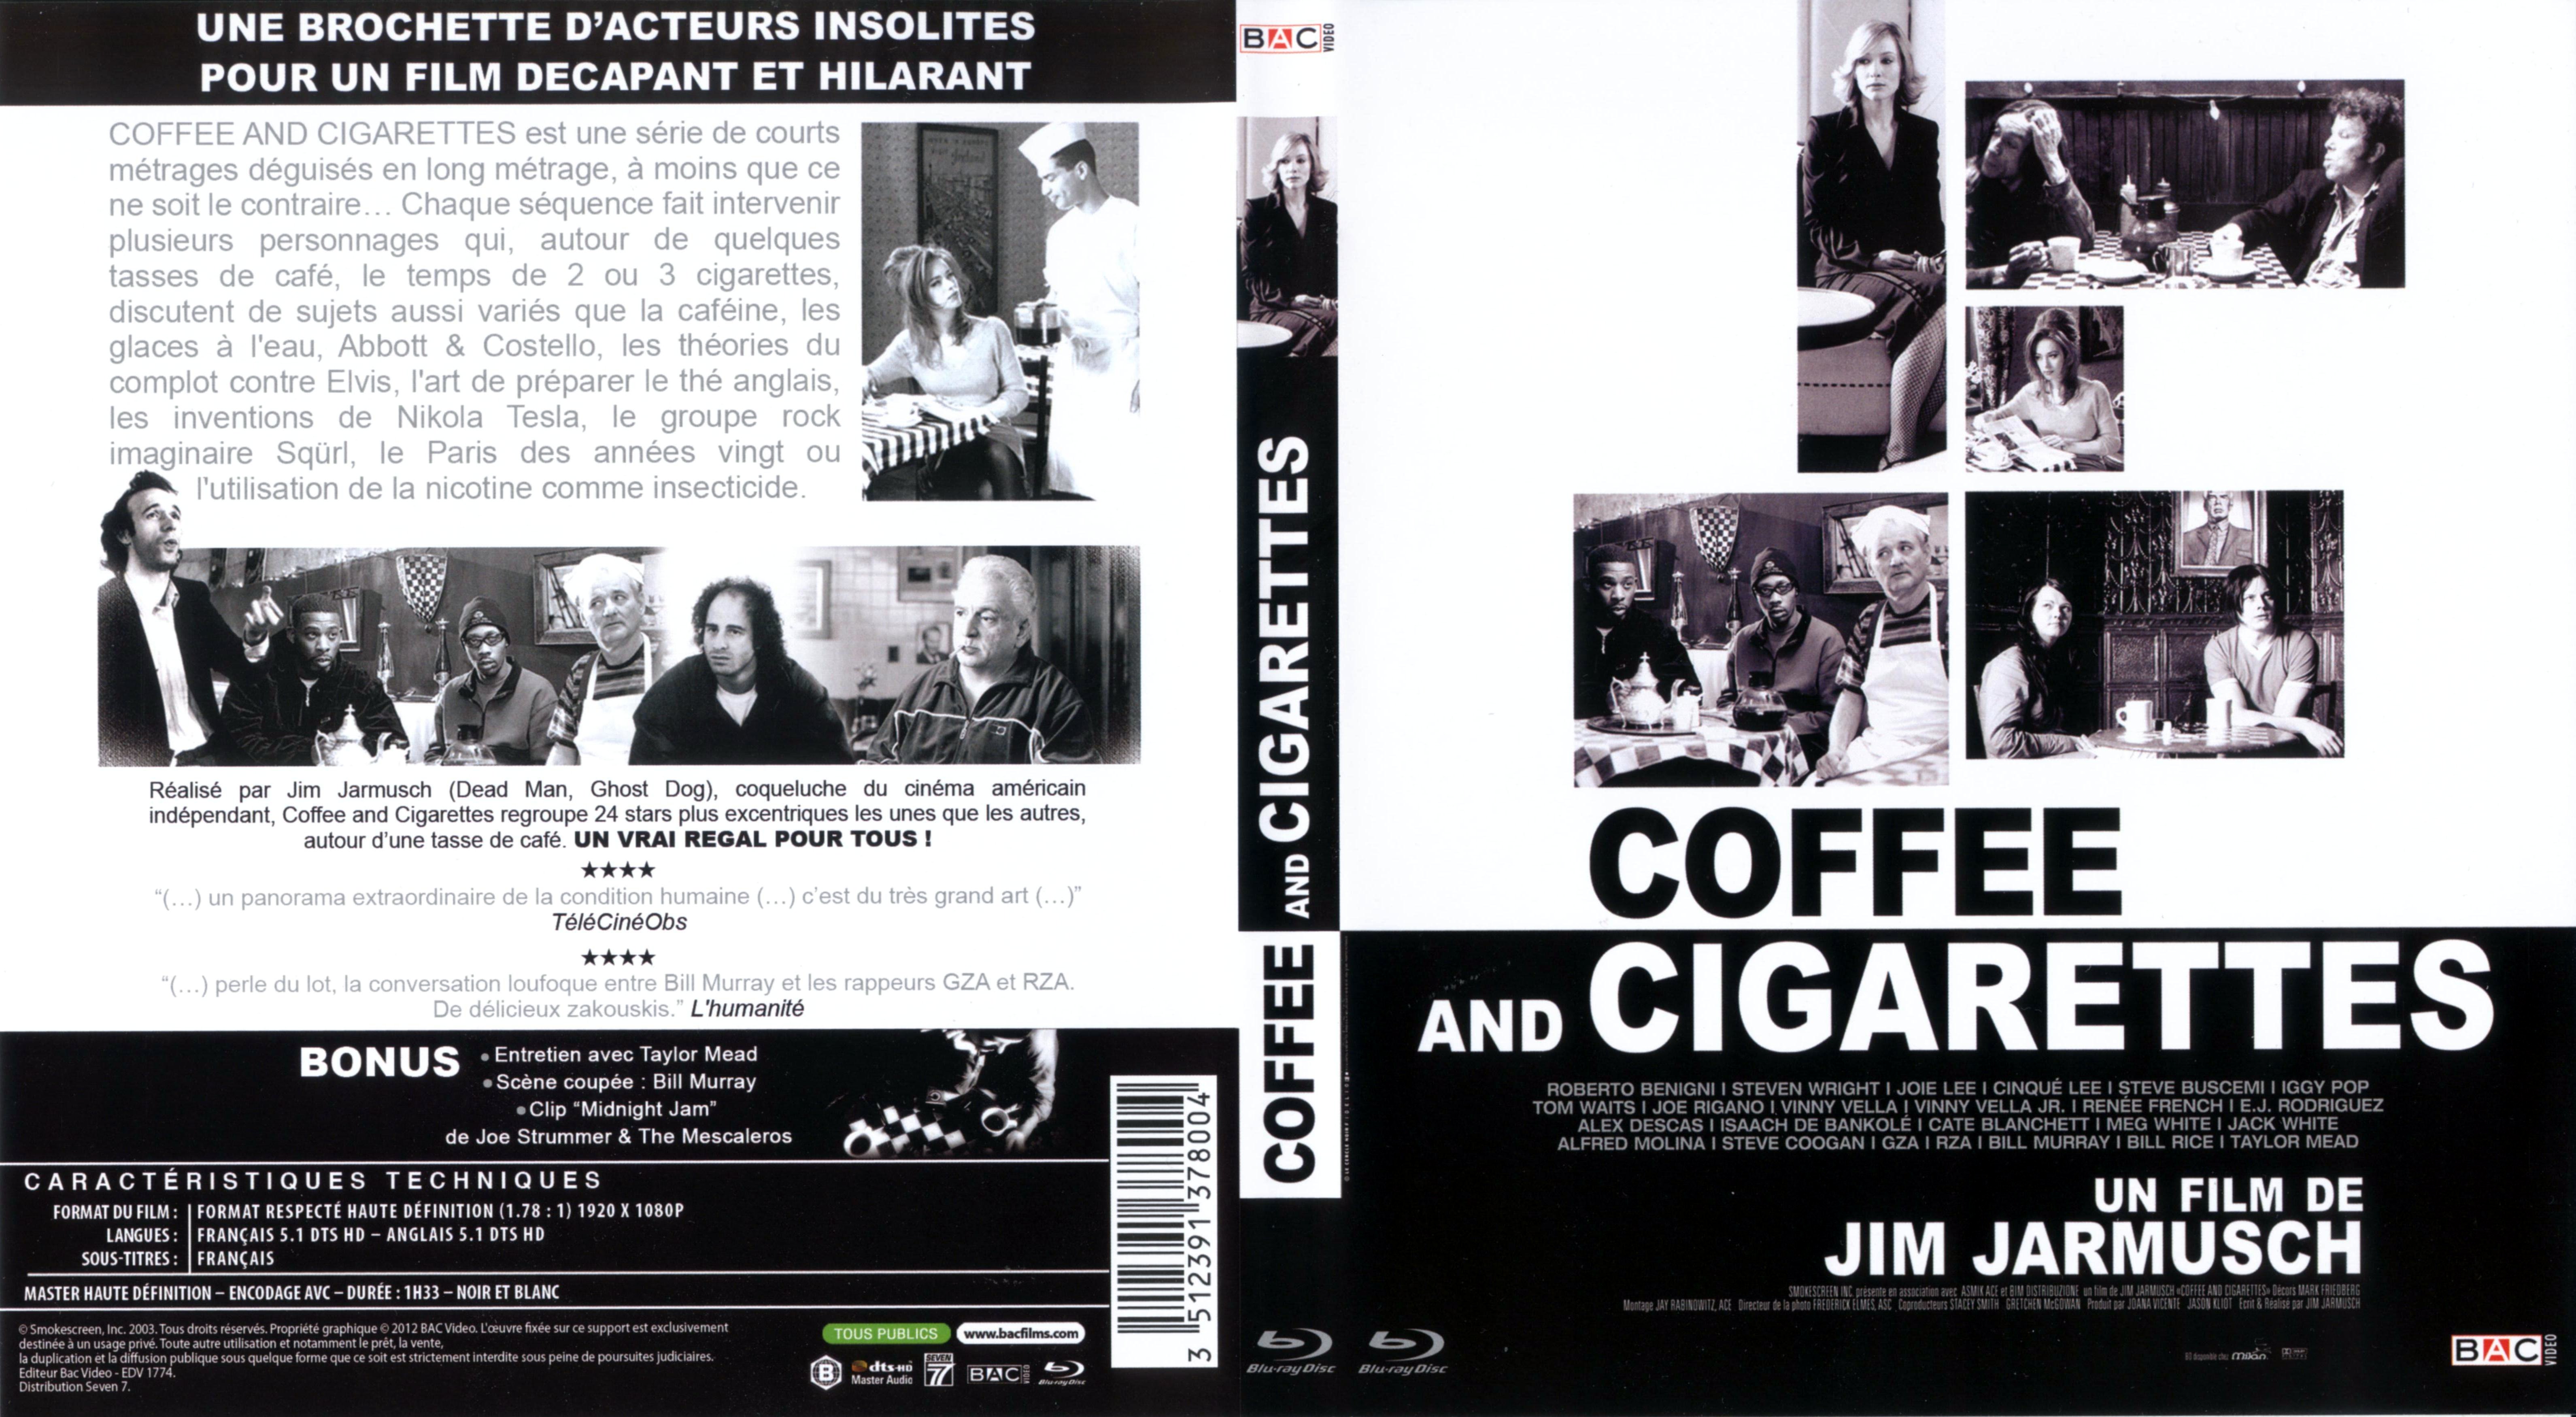 Jaquette DVD Coffee and cigarettes (BLU-RAY)